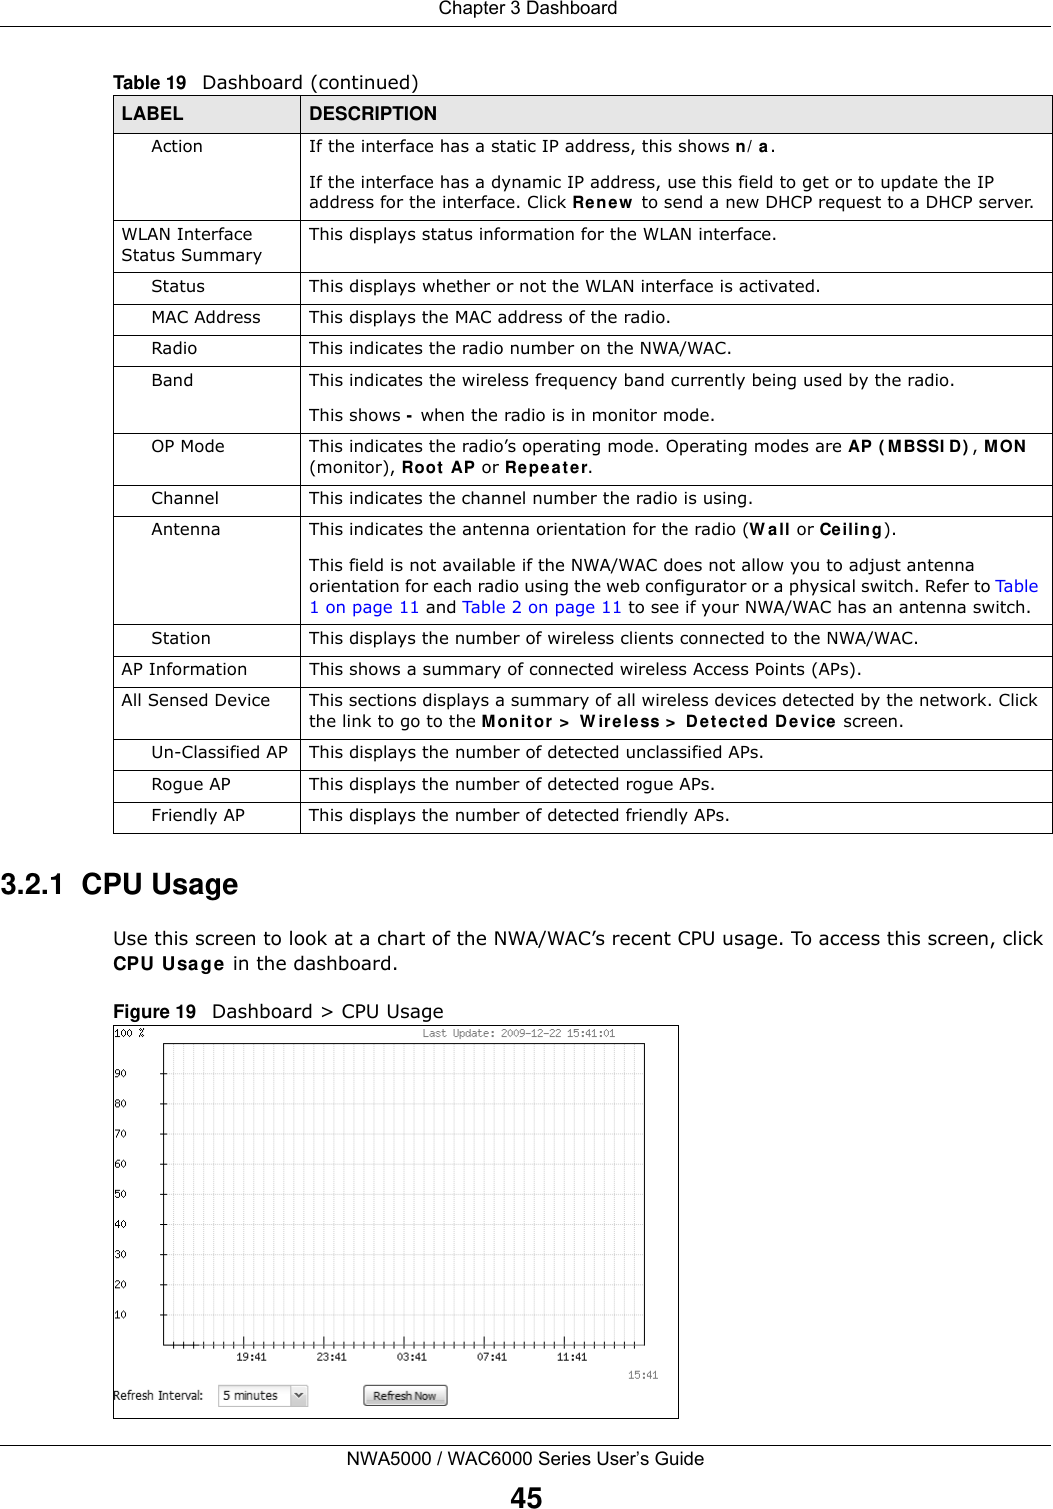  Chapter 3 DashboardNWA5000 / WAC6000 Series User’s Guide453.2.1  CPU UsageUse this screen to look at a chart of the NWA/WAC’s recent CPU usage. To access this screen, click CPU Usa ge in the dashboard.Figure 19   Dashboard &gt; CPU UsageAction If the interface has a static IP address, this shows n/ a. If the interface has a dynamic IP address, use this field to get or to update the IP address for the interface. Click Renew  to send a new DHCP request to a DHCP server. WLAN Interface Status SummaryThis displays status information for the WLAN interface.Status This displays whether or not the WLAN interface is activated.MAC Address This displays the MAC address of the radio.Radio This indicates the radio number on the NWA/WAC.Band This indicates the wireless frequency band currently being used by the radio. This shows - when the radio is in monitor mode.OP Mode This indicates the radio’s operating mode. Operating modes are AP ( M BSSI D) , M ON  (monitor), Root  AP or Re pea t er.Channel This indicates the channel number the radio is using.Antenna This indicates the antenna orientation for the radio (W all or Ceiling).This field is not available if the NWA/WAC does not allow you to adjust antenna orientation for each radio using the web configurator or a physical switch. Refer to Ta b le  1 on page 11 and Table 2 on page 11 to see if your NWA/WAC has an antenna switch.Station This displays the number of wireless clients connected to the NWA/WAC.AP Information This shows a summary of connected wireless Access Points (APs). All Sensed Device This sections displays a summary of all wireless devices detected by the network. Click the link to go to the Mon itor &gt;  W irele ss &gt;  Detected D e vice screen.Un-Classified AP This displays the number of detected unclassified APs.Rogue AP This displays the number of detected rogue APs.Friendly AP This displays the number of detected friendly APs.Table 19   Dashboard (continued)LABEL DESCRIPTION